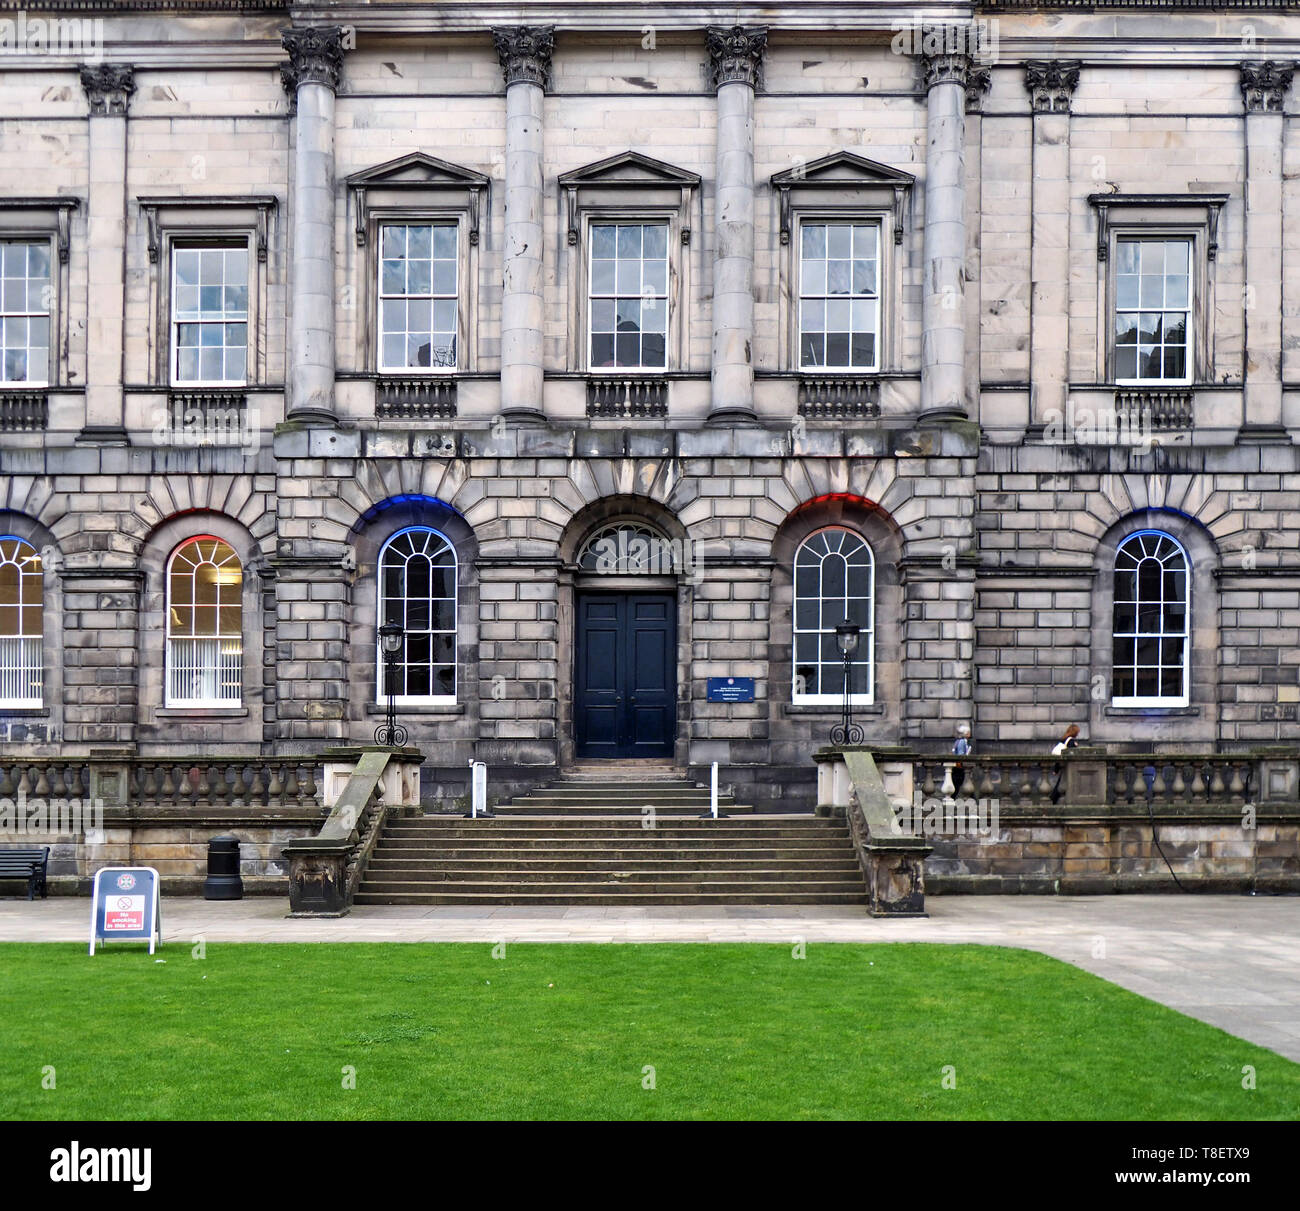 EDINBURCH - SEPTEMBER 2016:  The classical stone campus of the University of Edinburgh's Old College is located on a quadrangle that dates from the mi Stock Photo